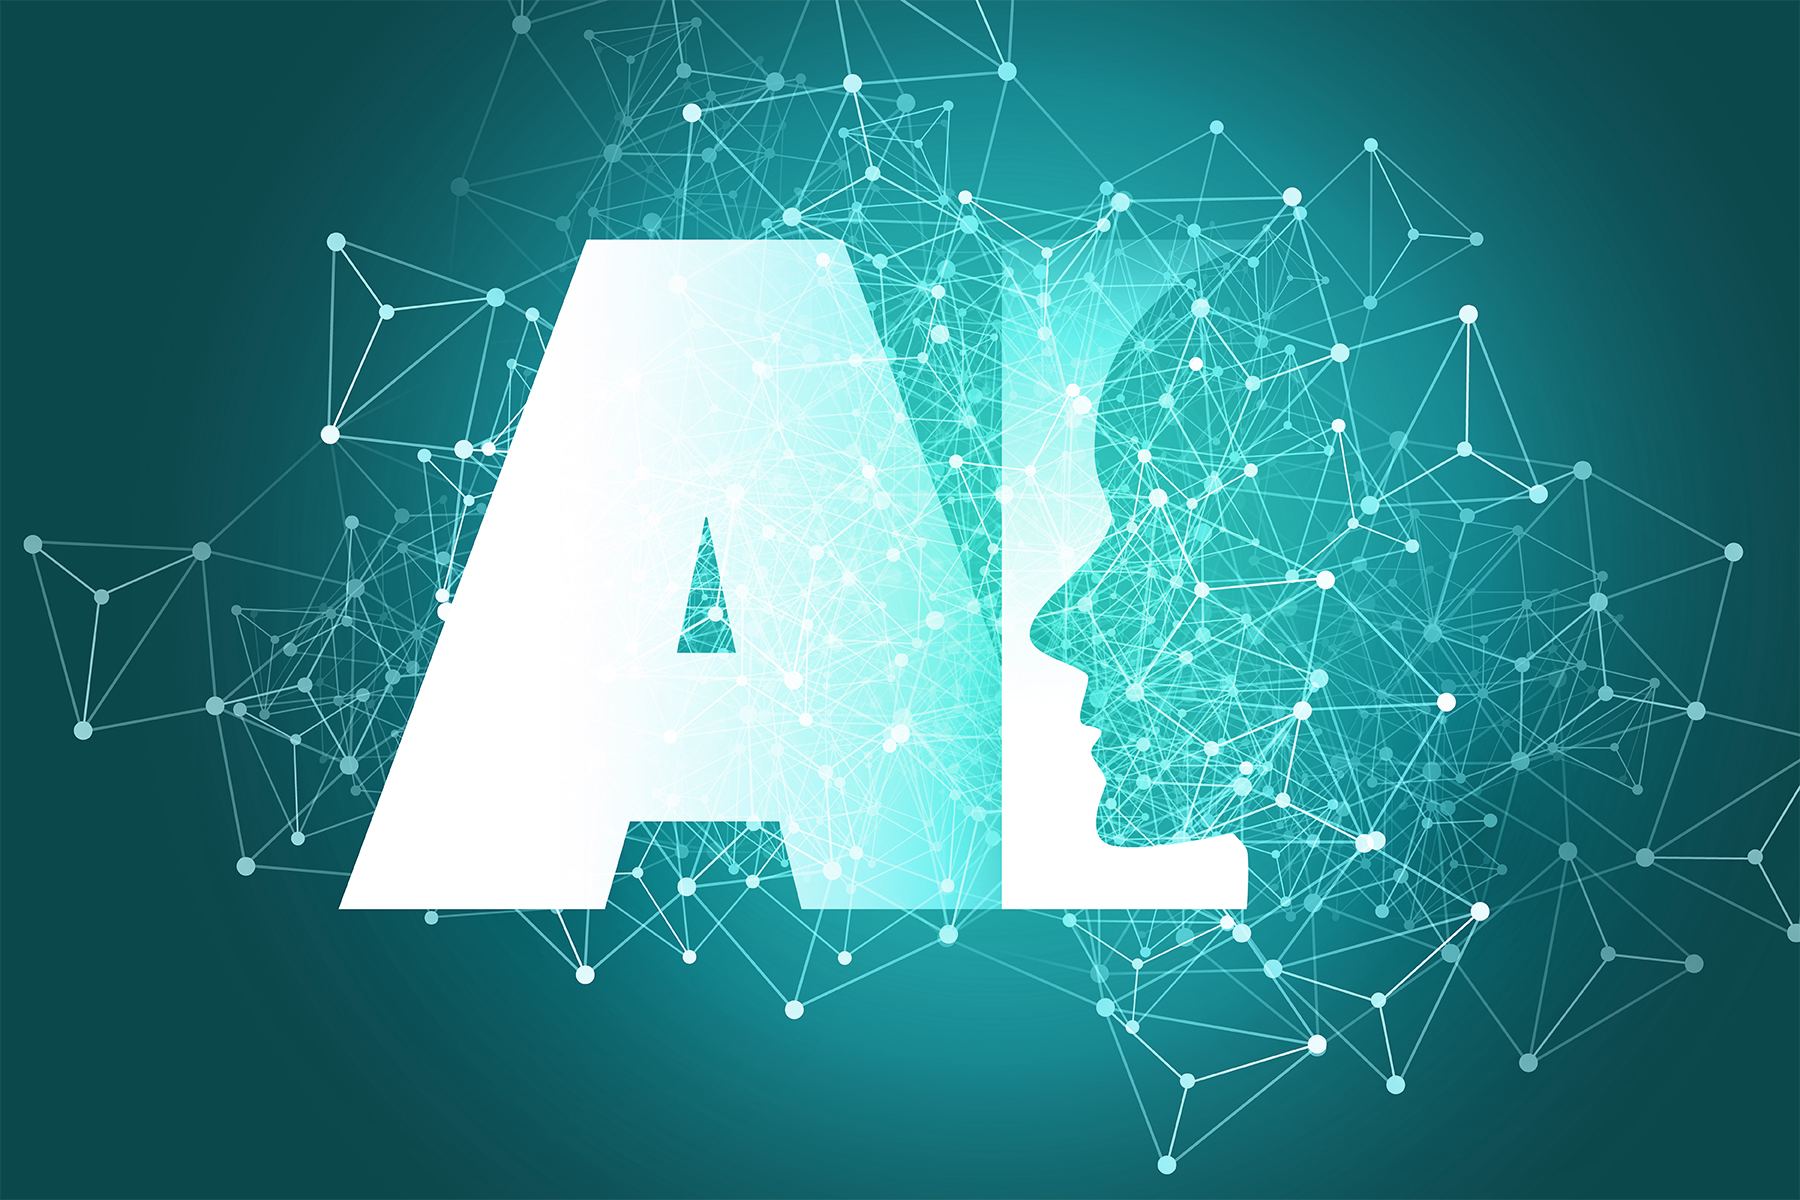 The letters 'AI' white on a teal background, the profile of a face overlapping the 'I." Dots connected to each other with lines are all around the letters. This is meant to convey both the human-like aspects of AI, and the concept that the connections AI makes is similar to neurons in the brain.